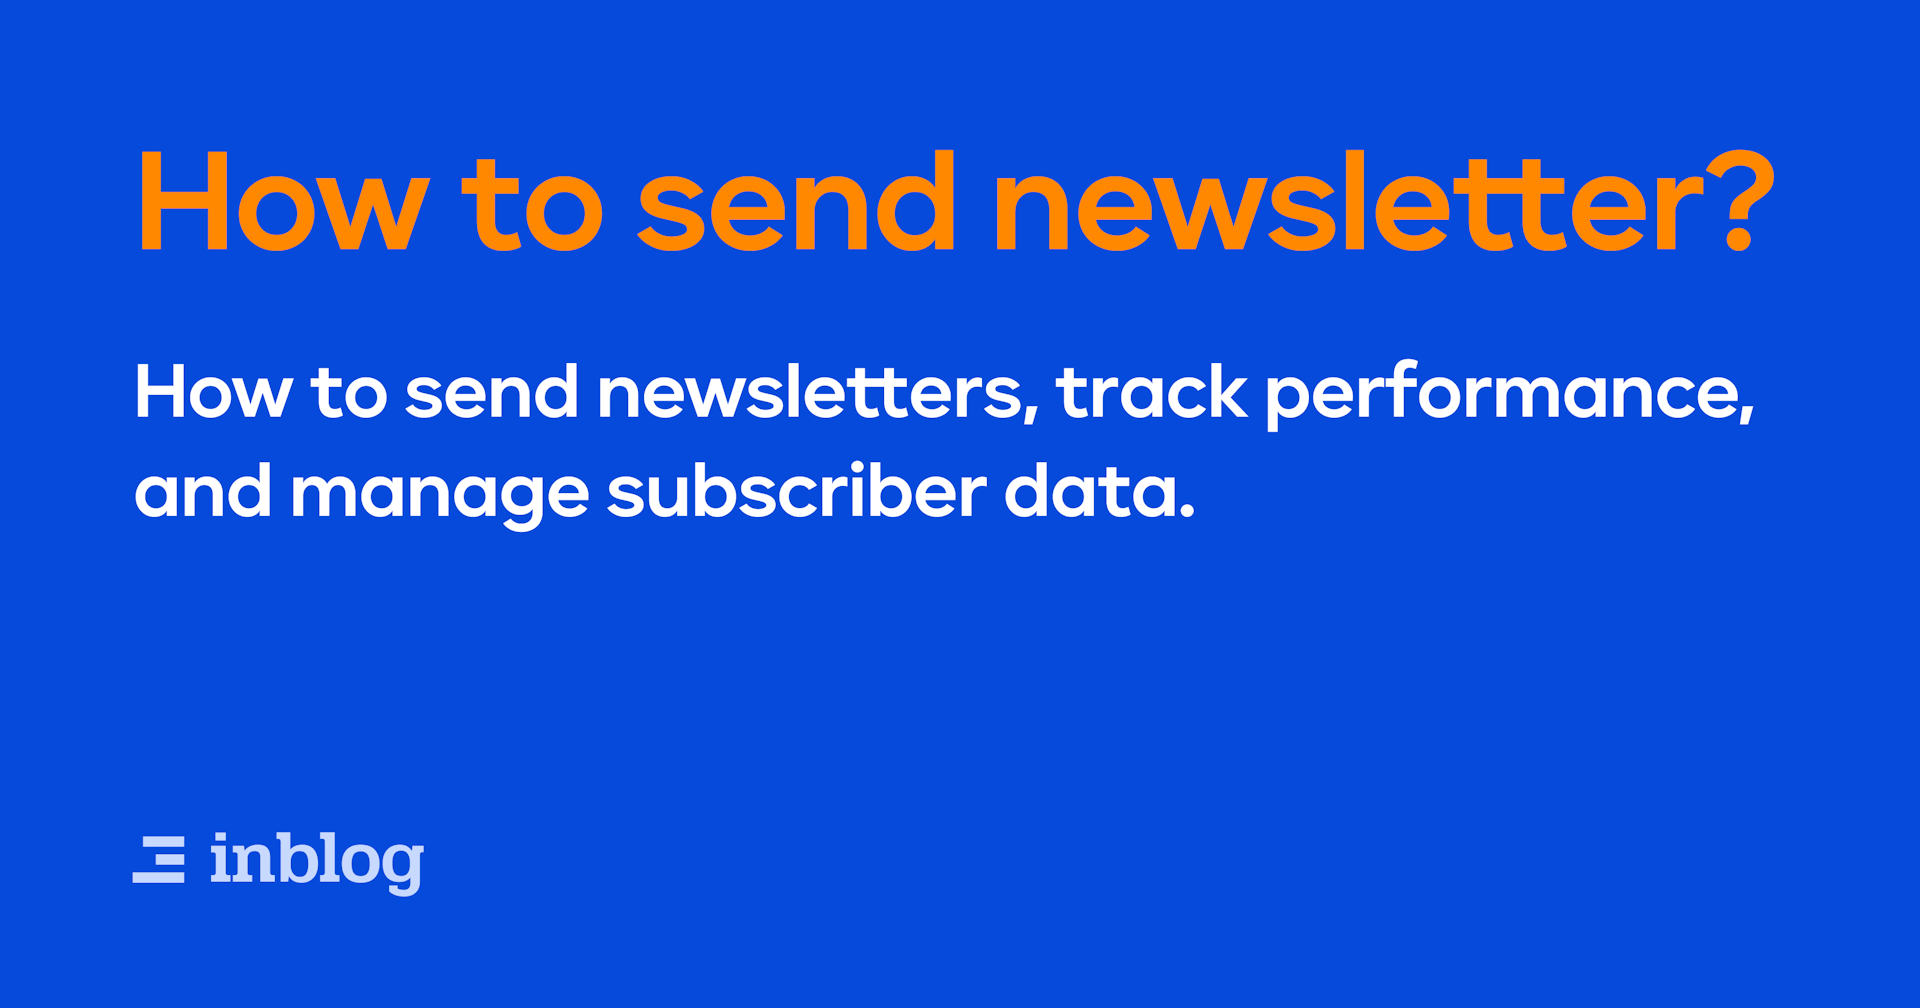 How to send newsletter?